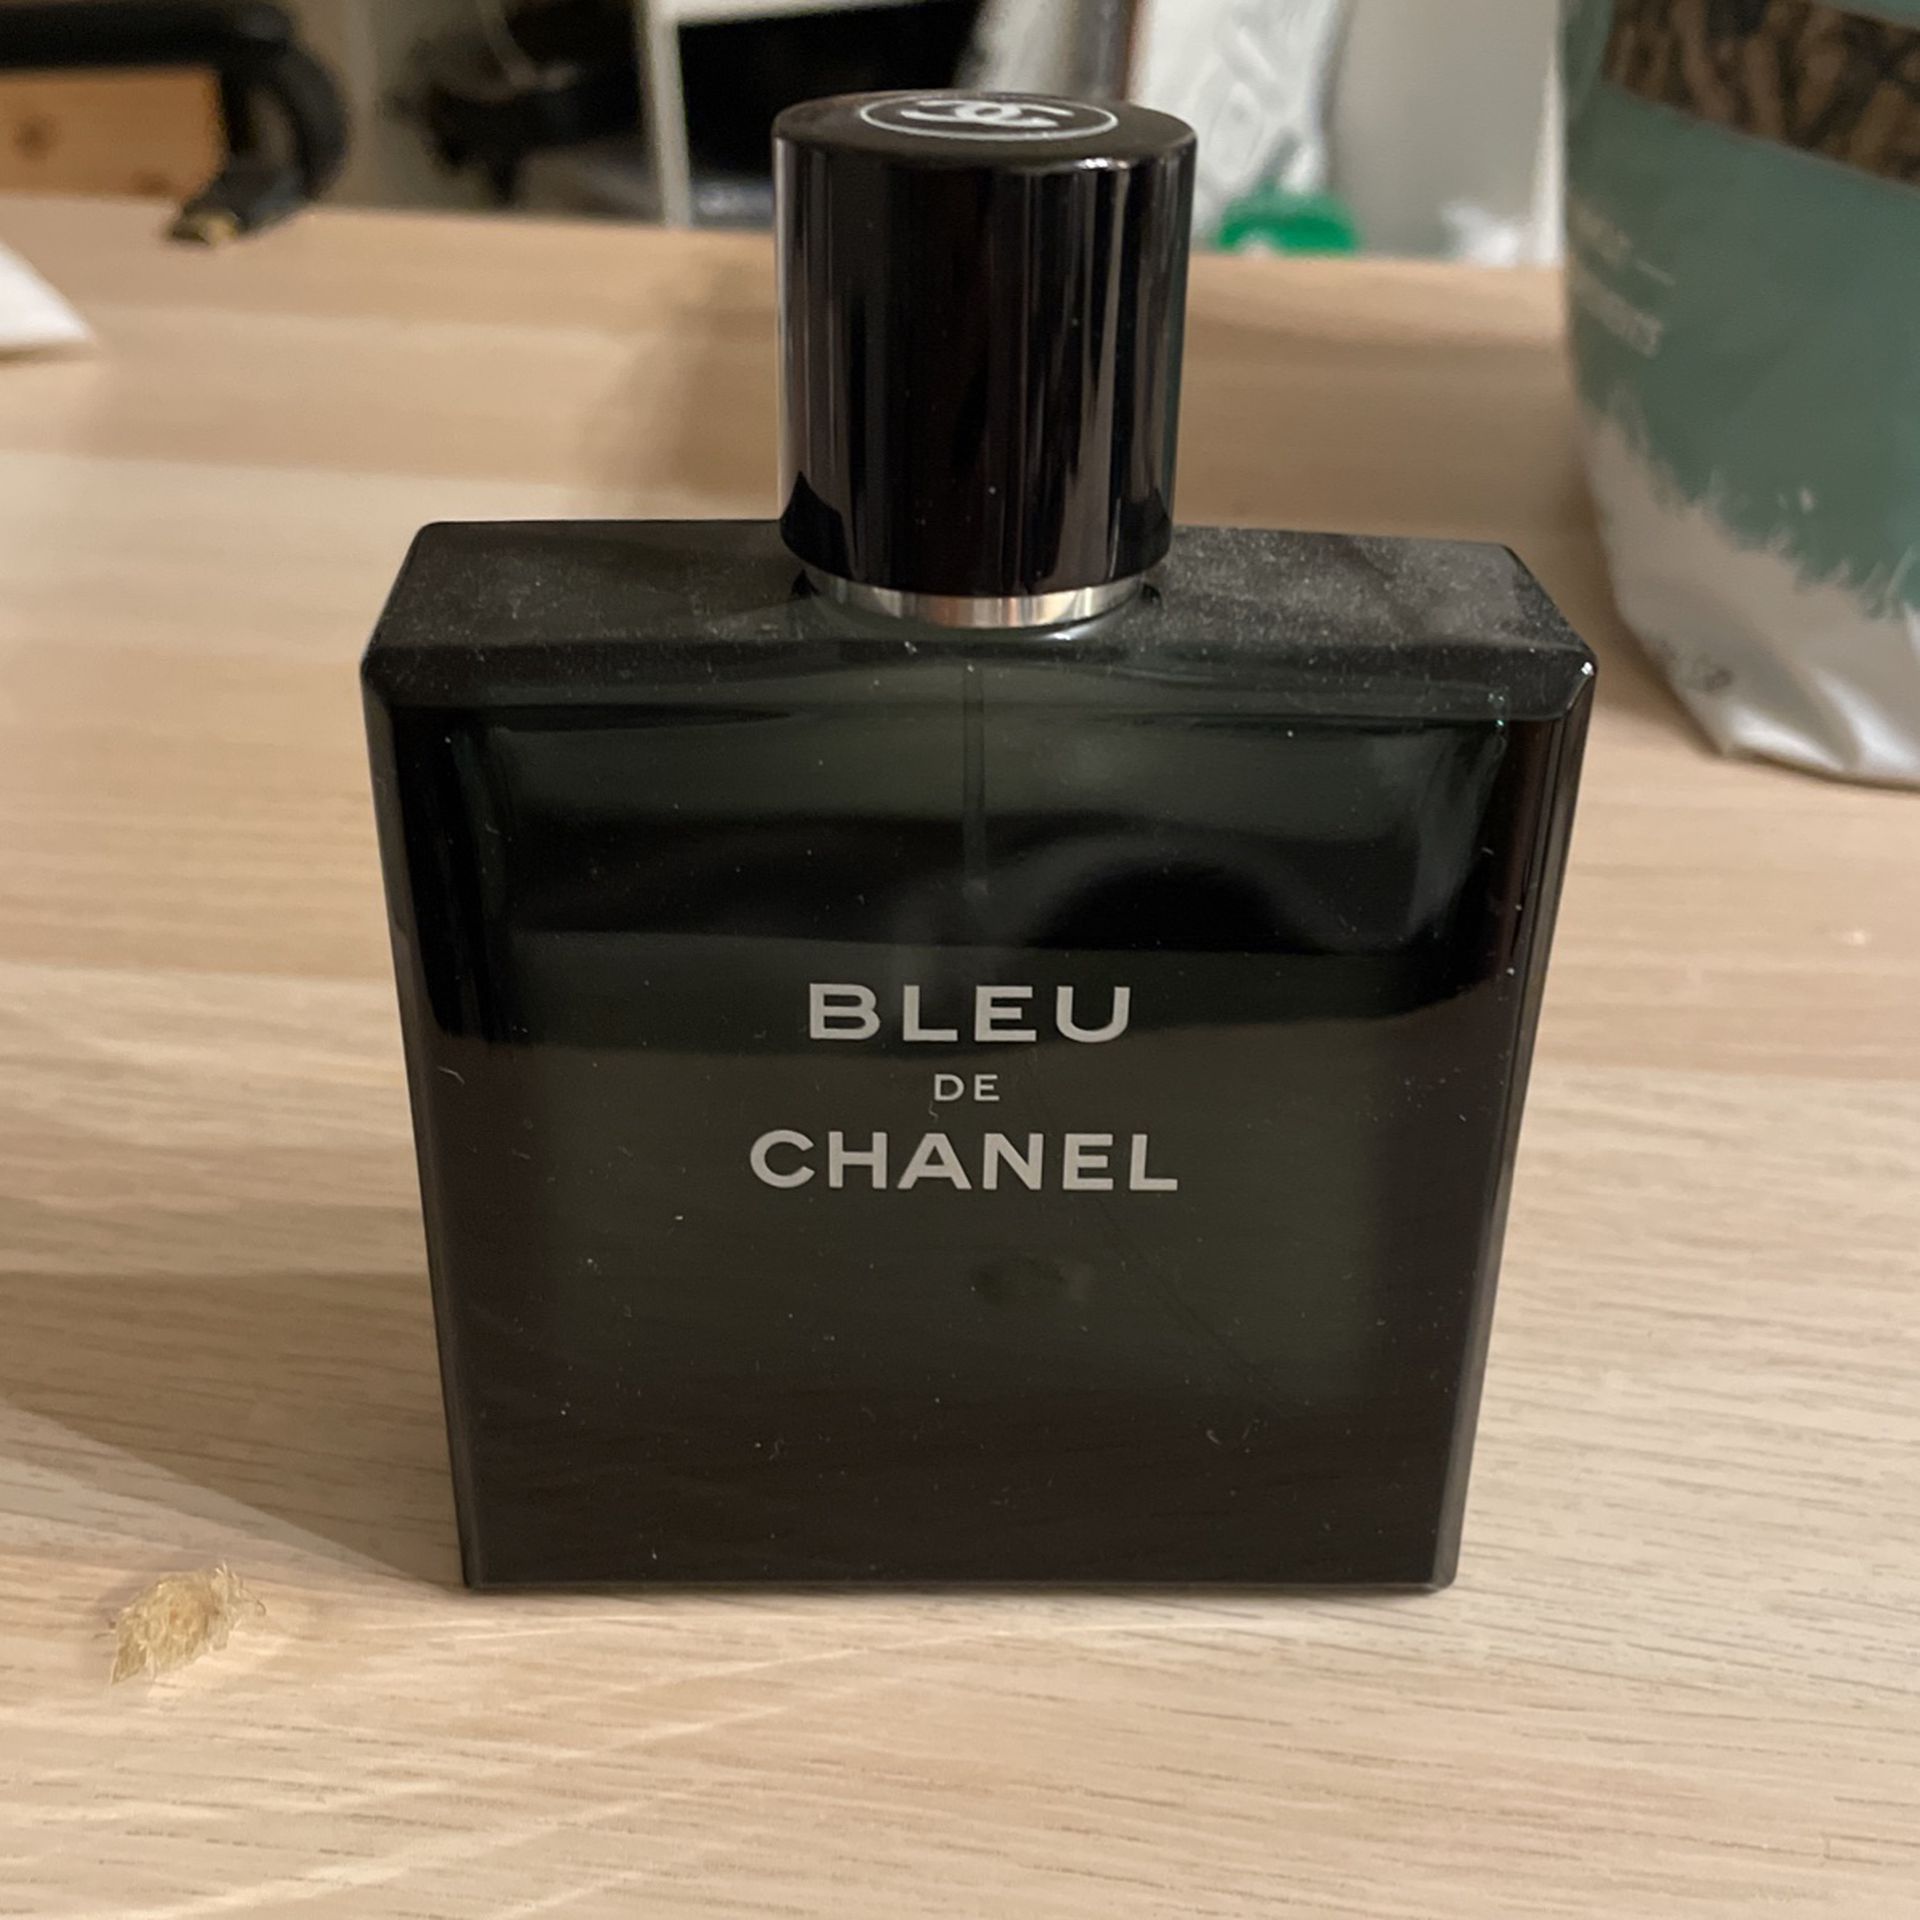 Chanel Bleu Perfume For Men For Sale for Sale in San Diego, CA - OfferUp